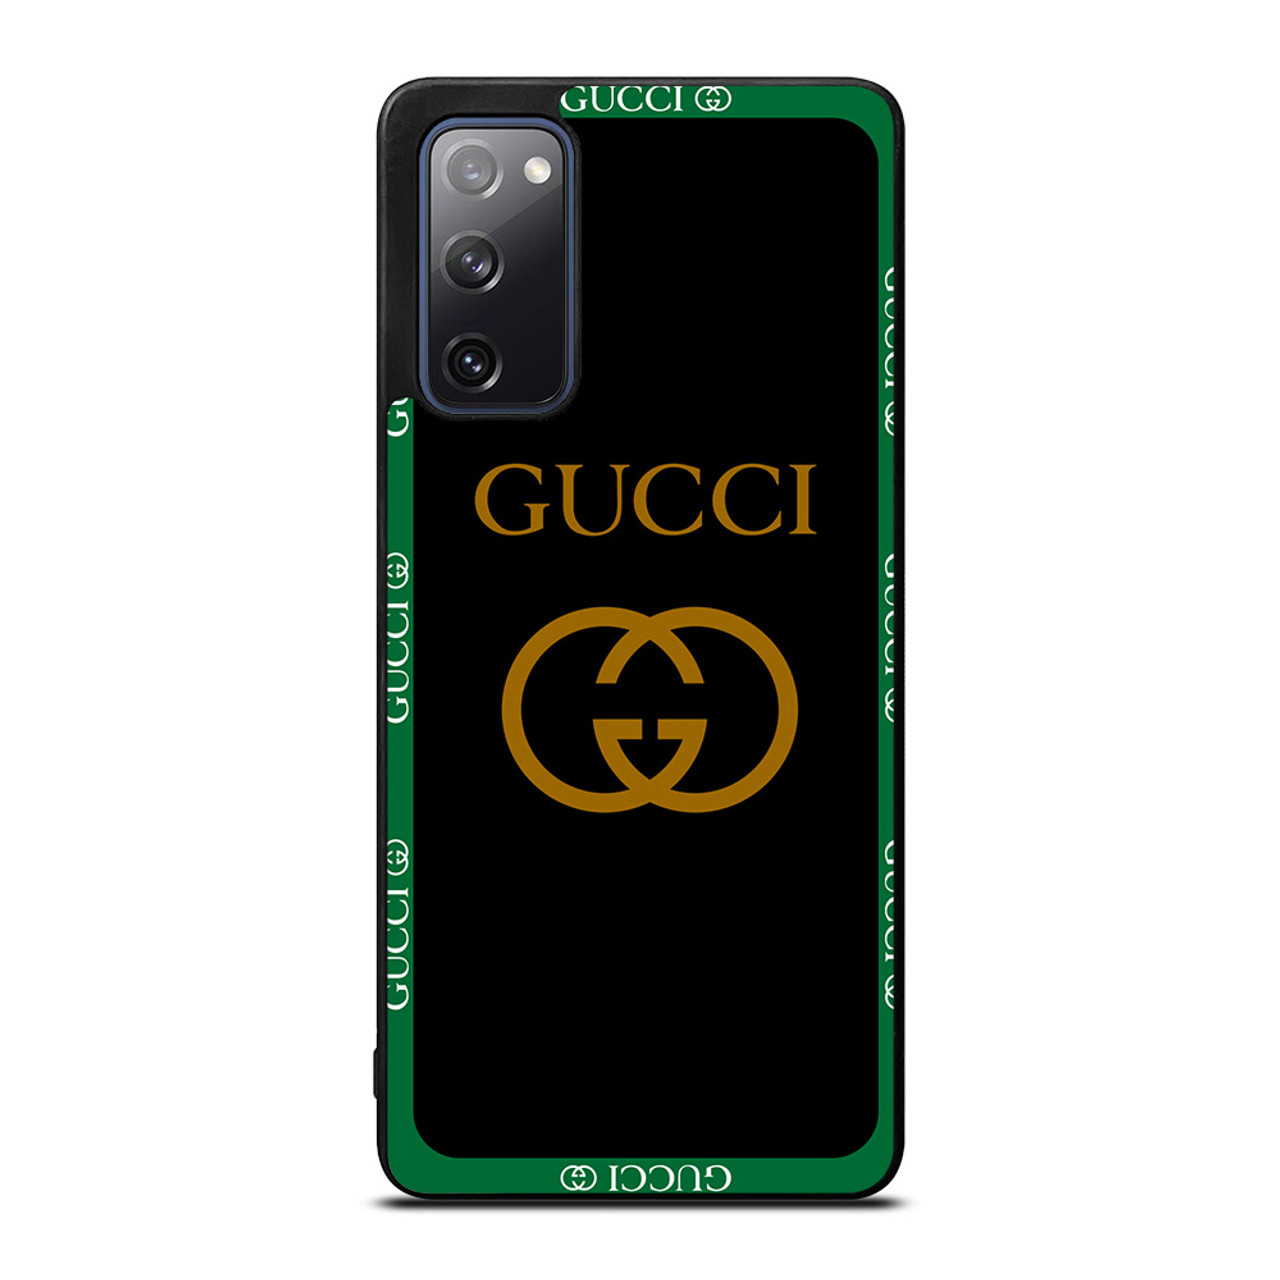 Iphone 7 plus casing gucci snake, Mobile Phones & Gadgets, Mobile